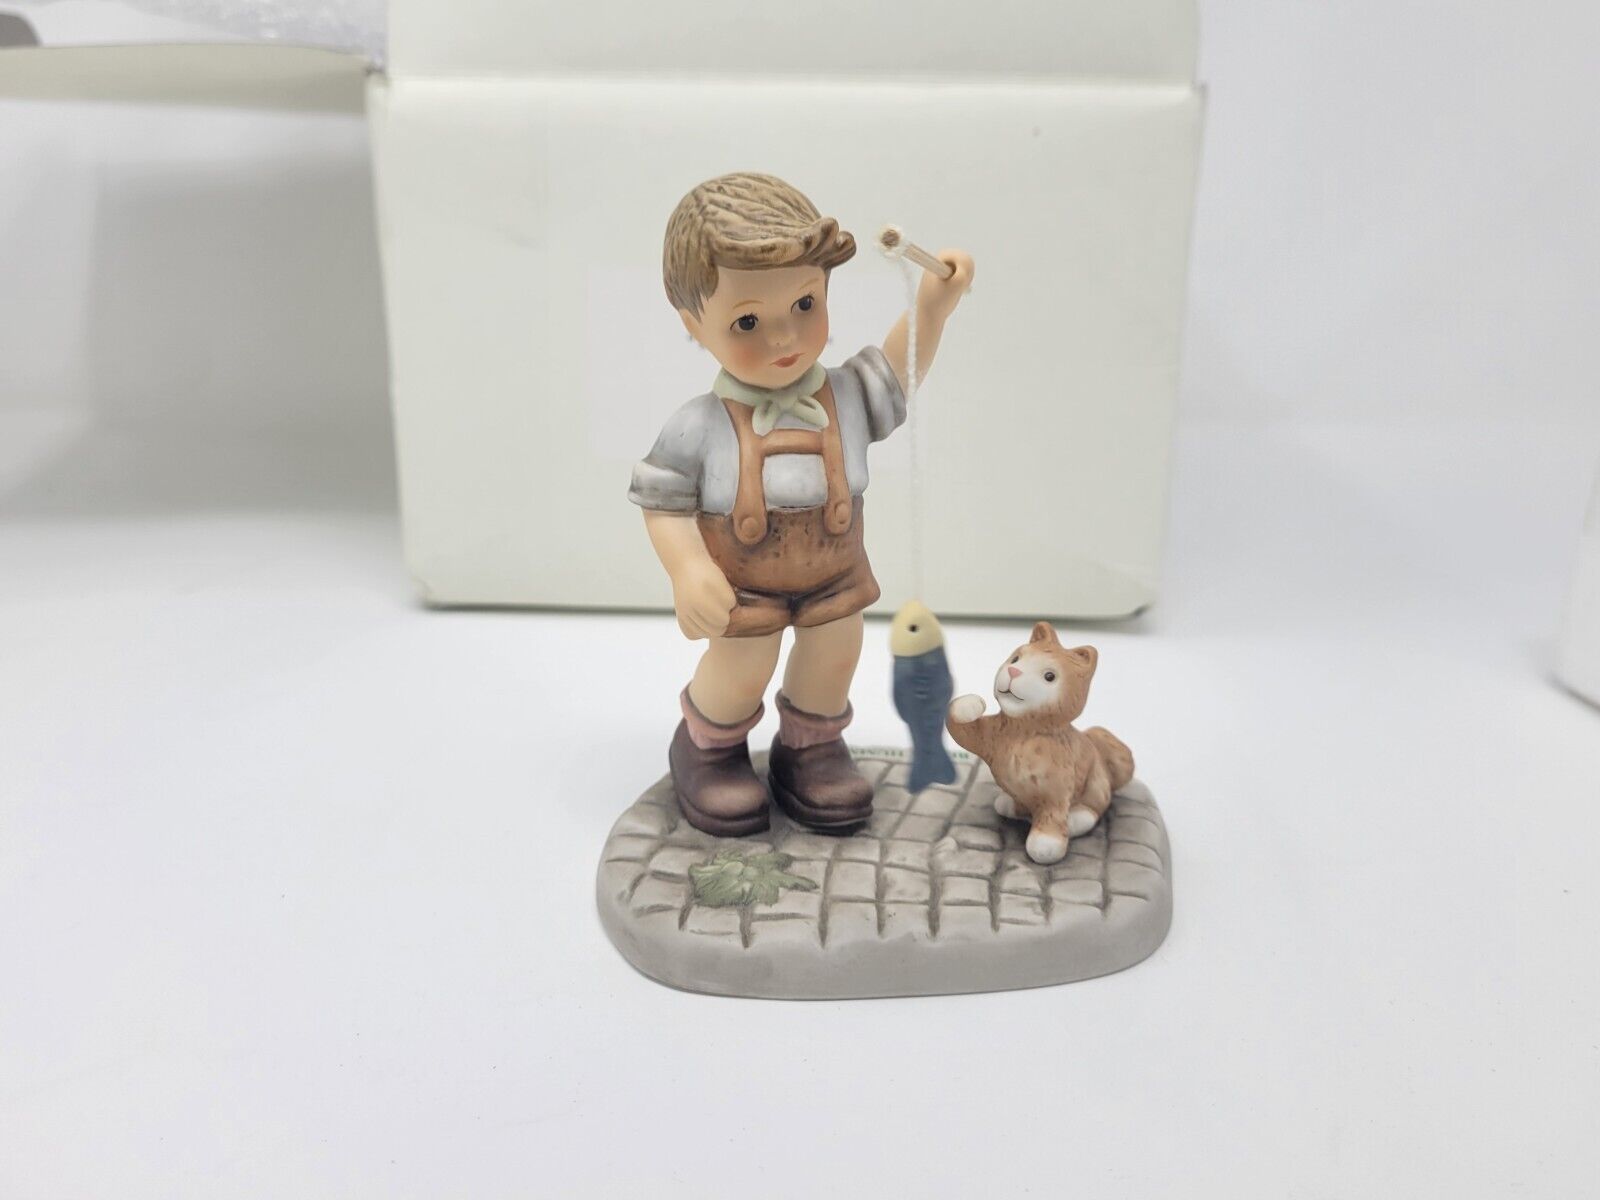 Goebel Hummel Figurine BH 153 “What a Catch” 2000  Pre-owned